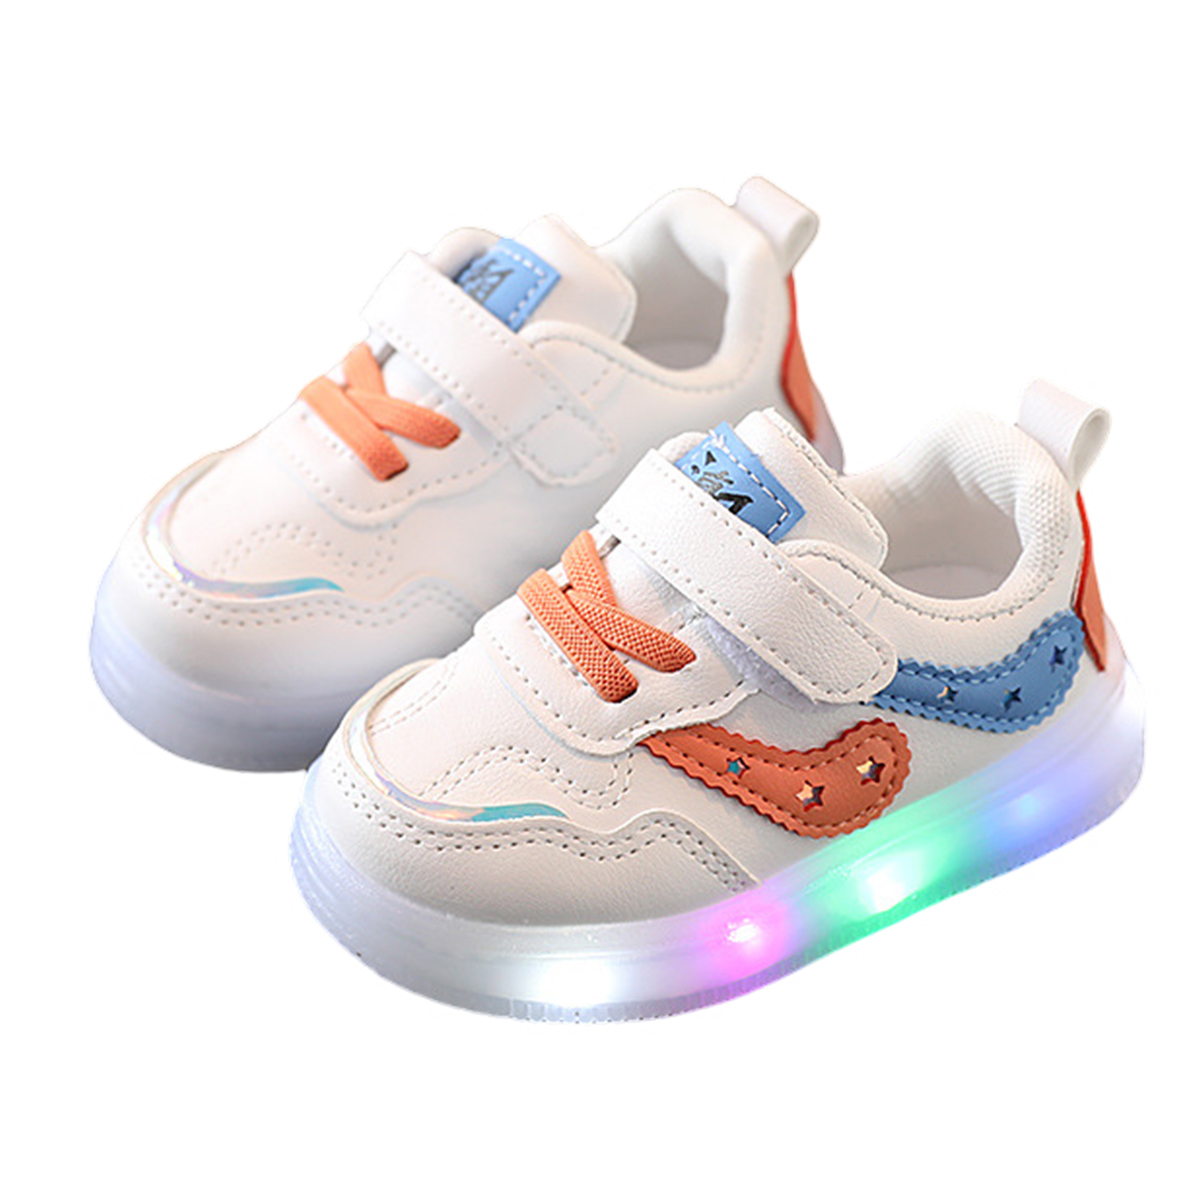  Light Up Small White Shoes